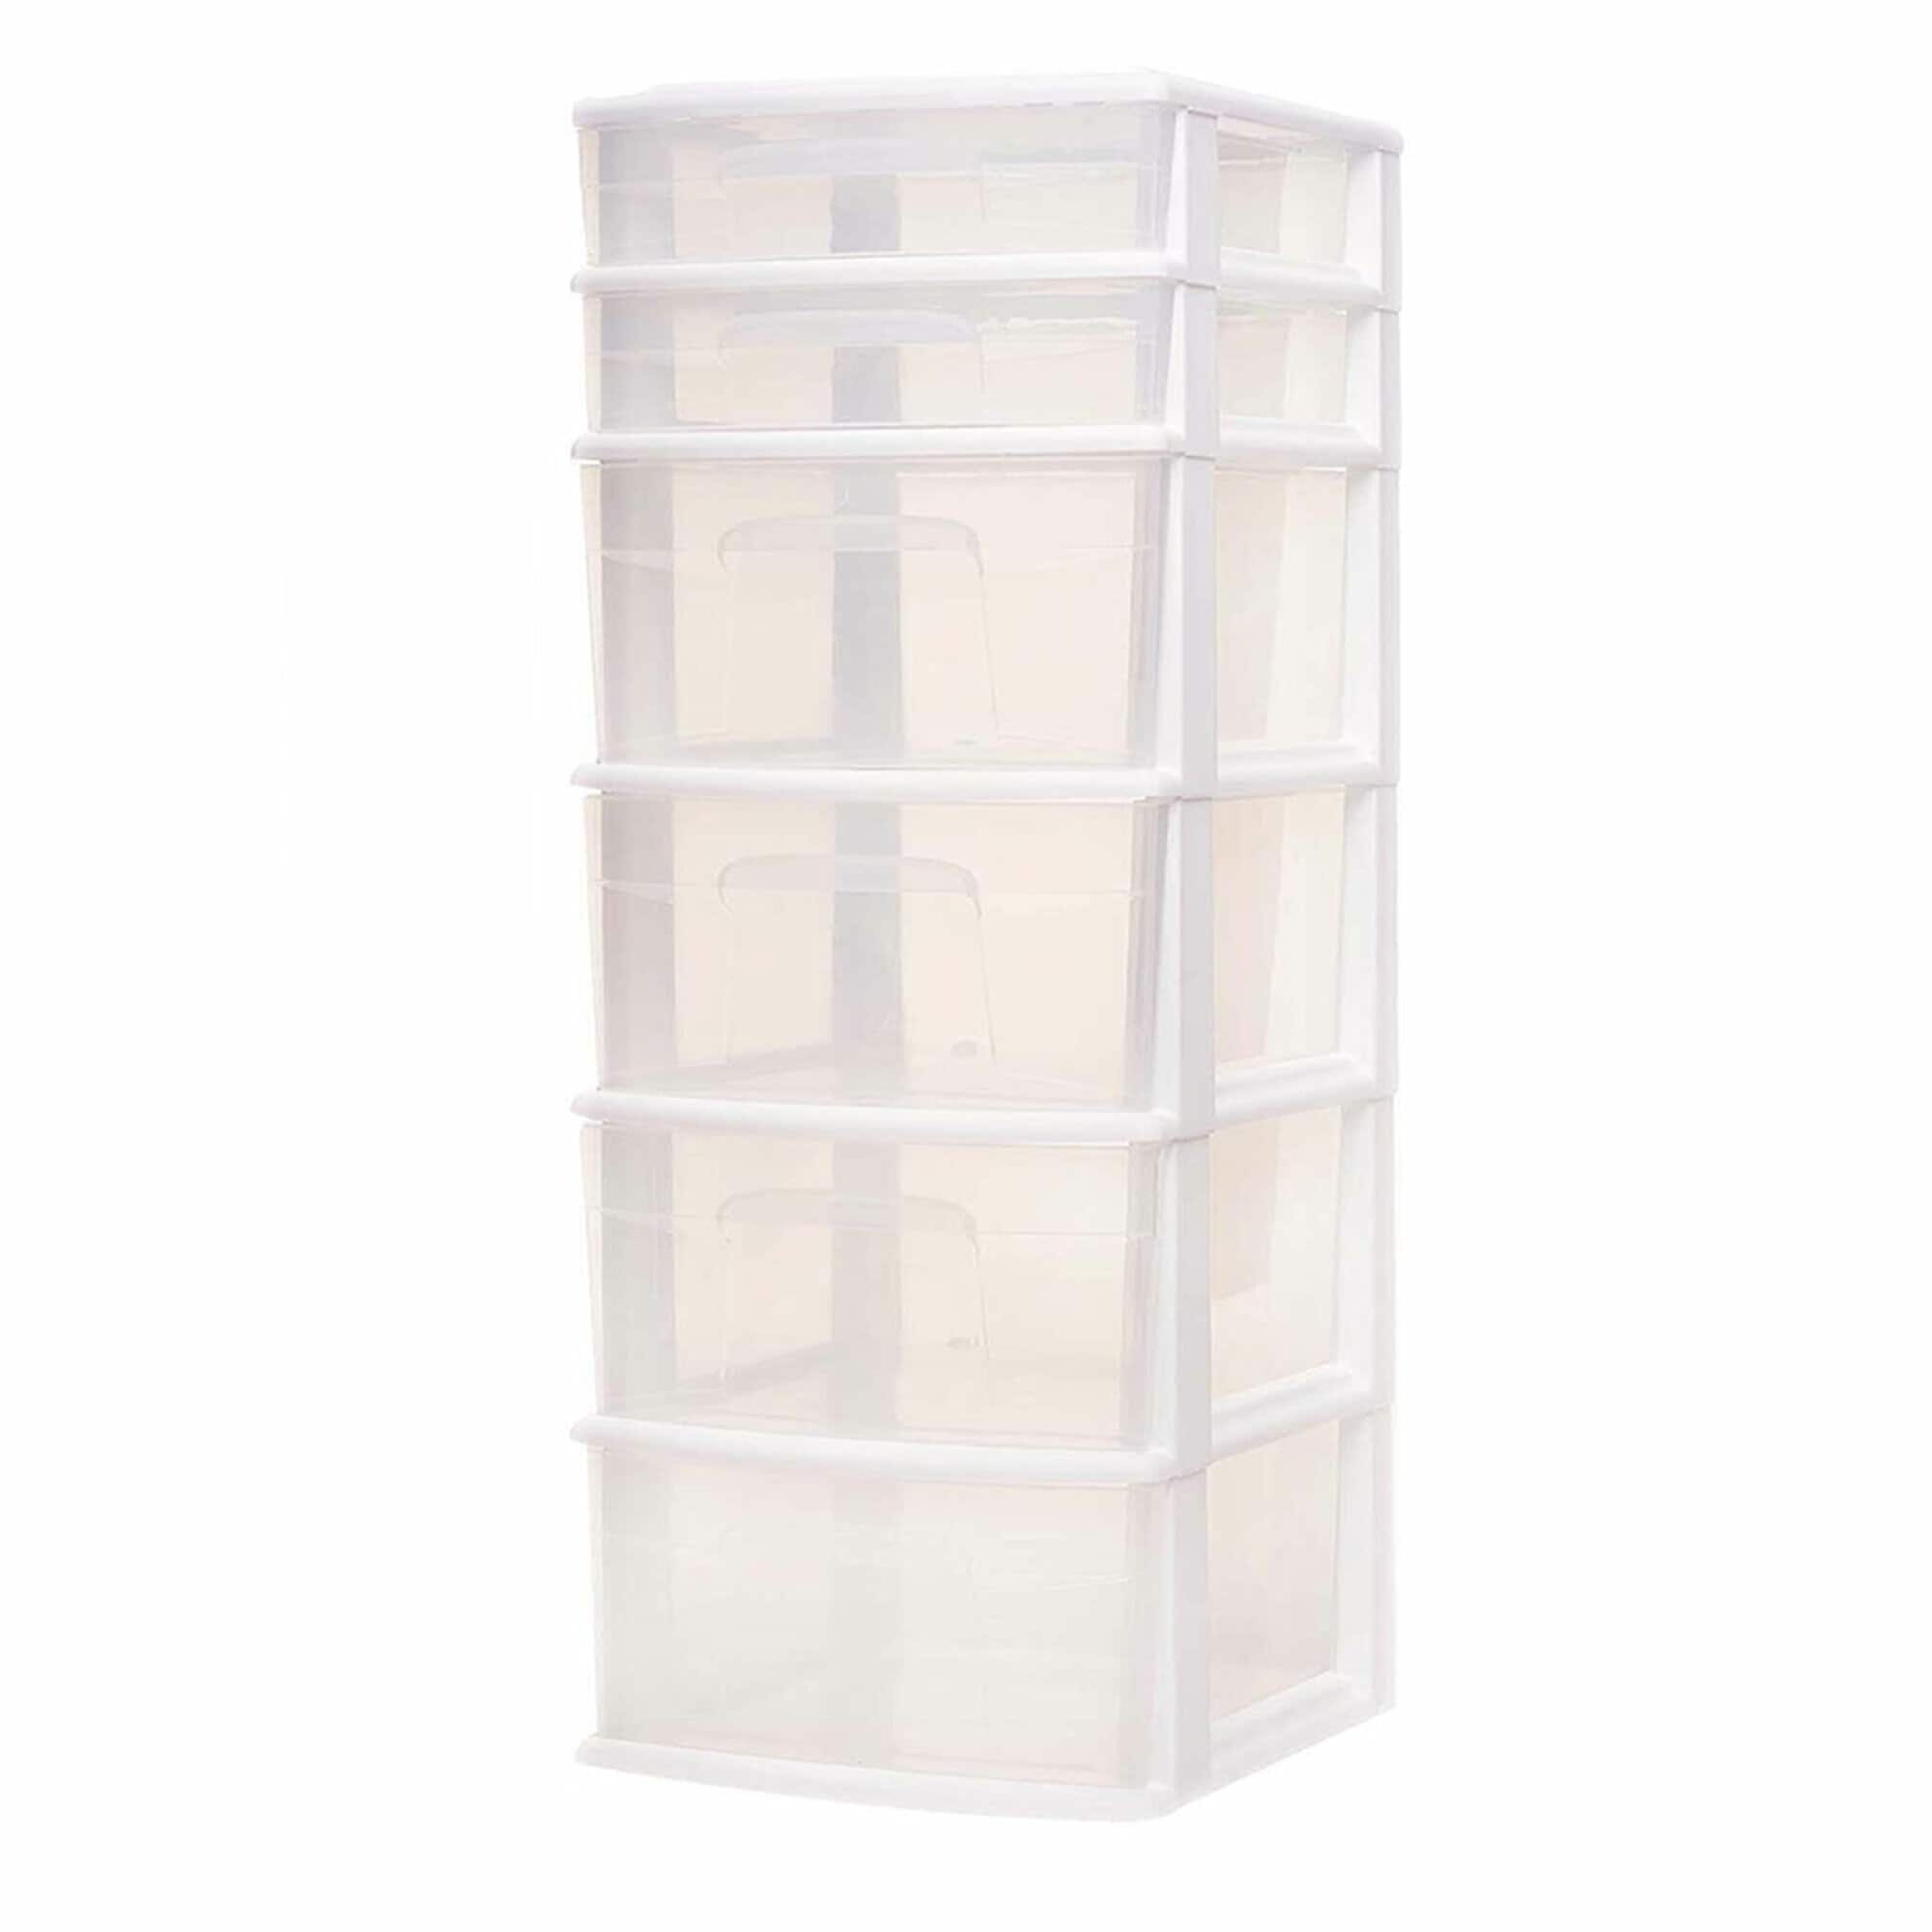 Homz Plastic 5 Clear Drawer Medium Home Organization Storage Container  Tower with 3 Large Drawers and 2 Small Drawers, Black Frame